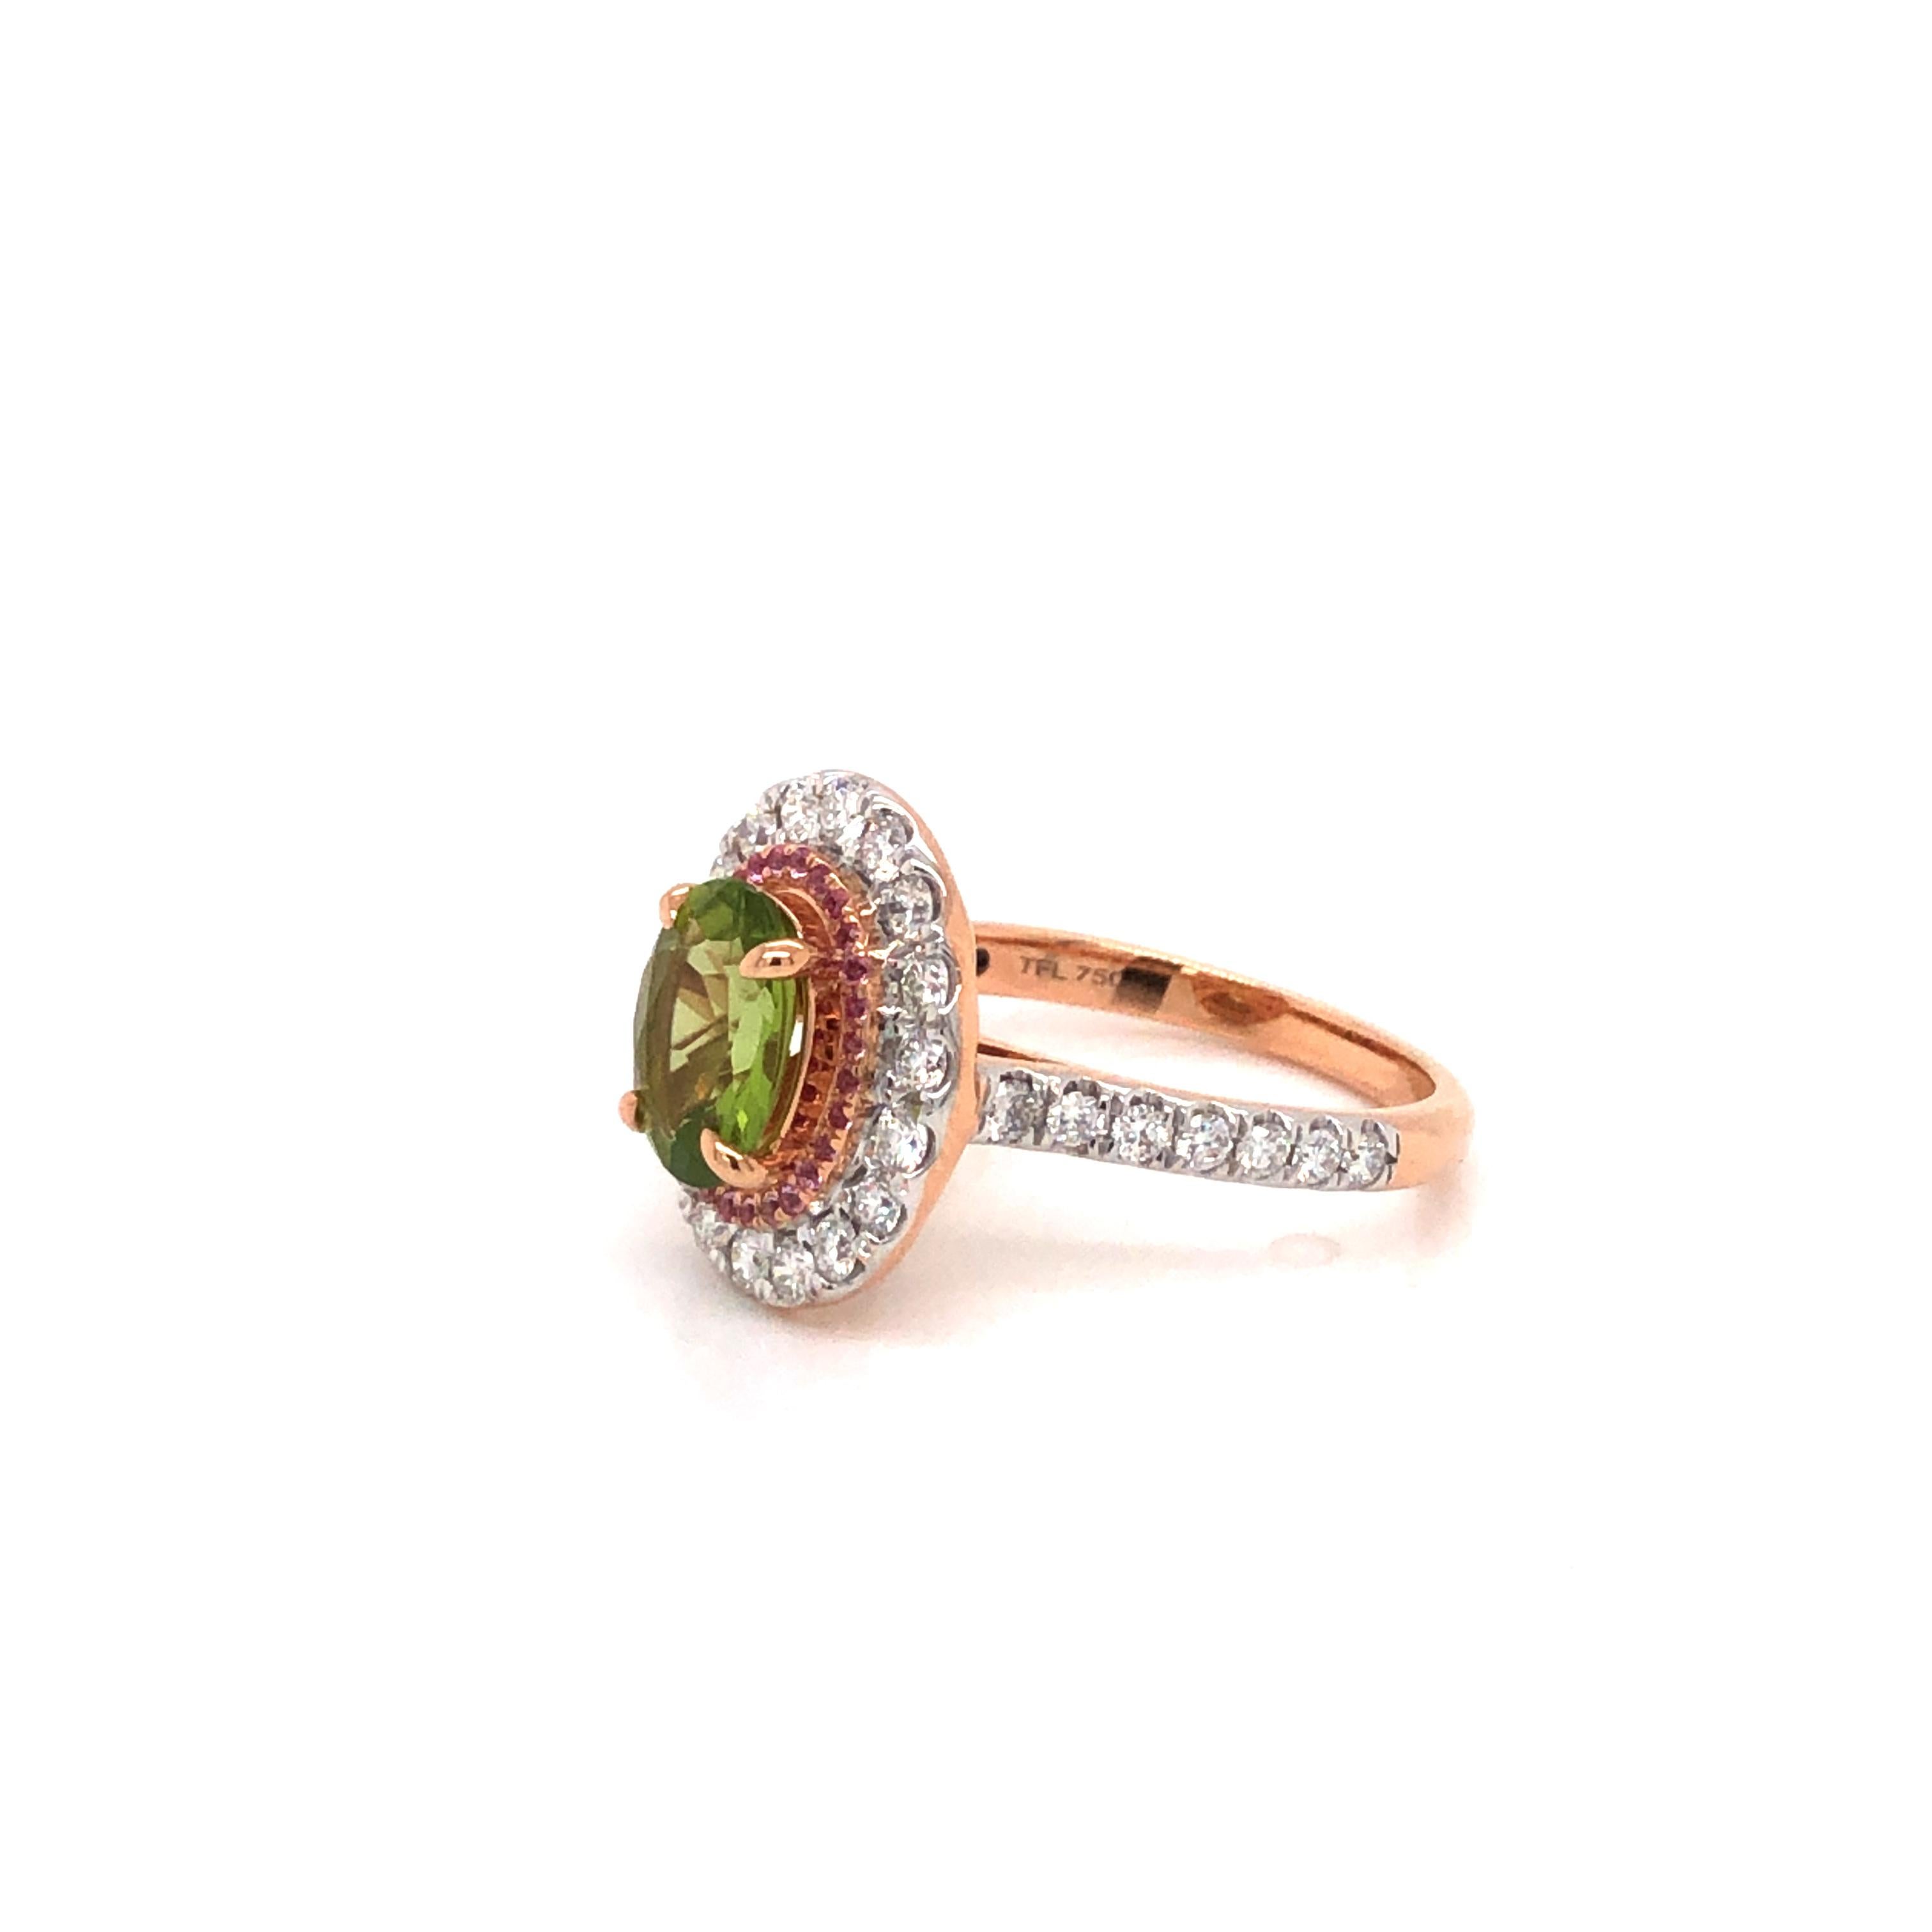 2.5 Carat Green Peridot Pink Sapphire Diamond Engagement Cocktail 18KT Ring For Sale 3